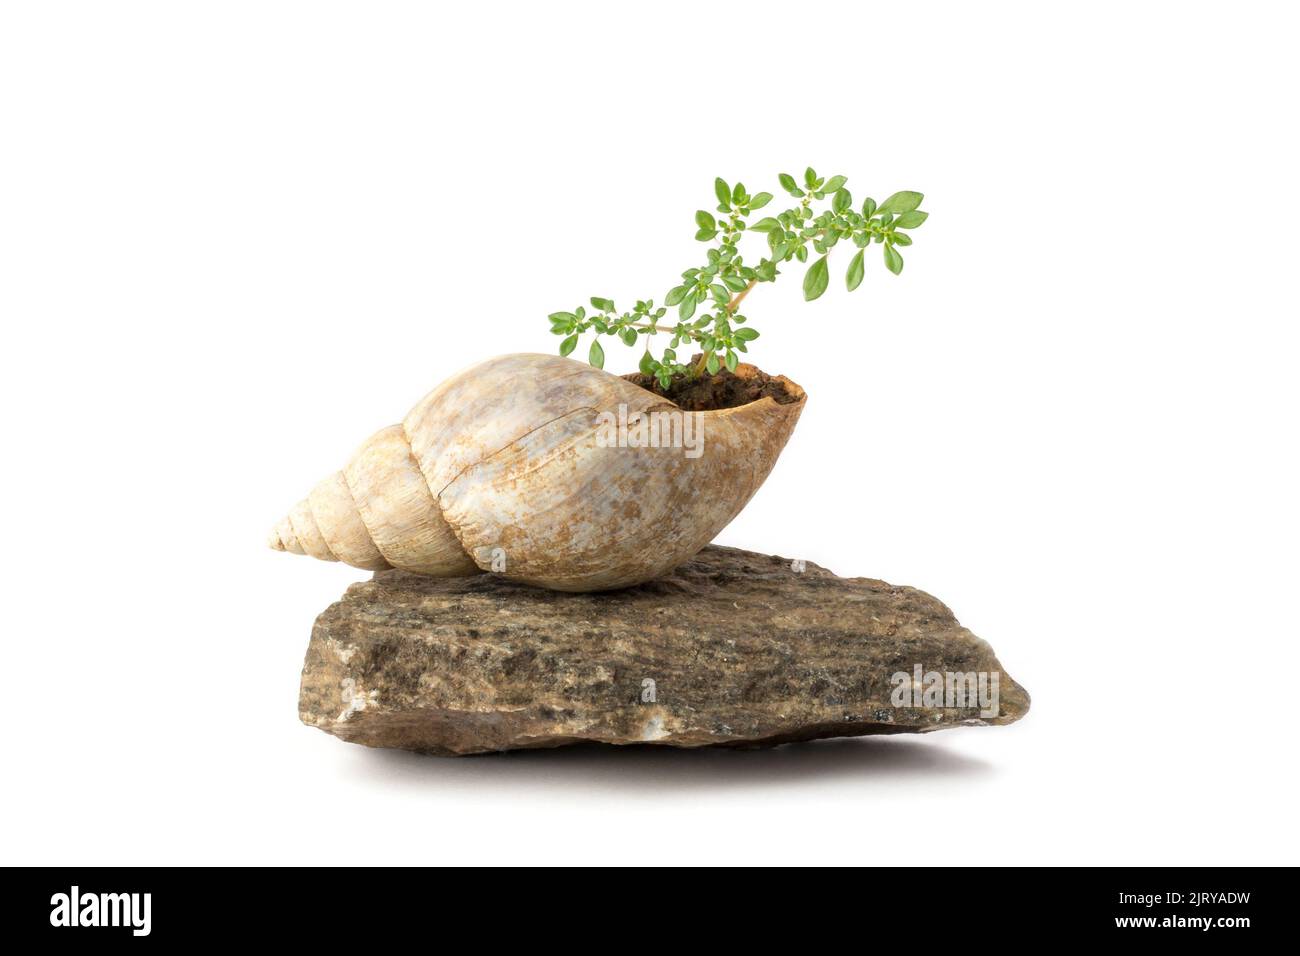 plant growing in snail shell on top of a rock, isolated on white background, miniature gardening concept Stock Photo